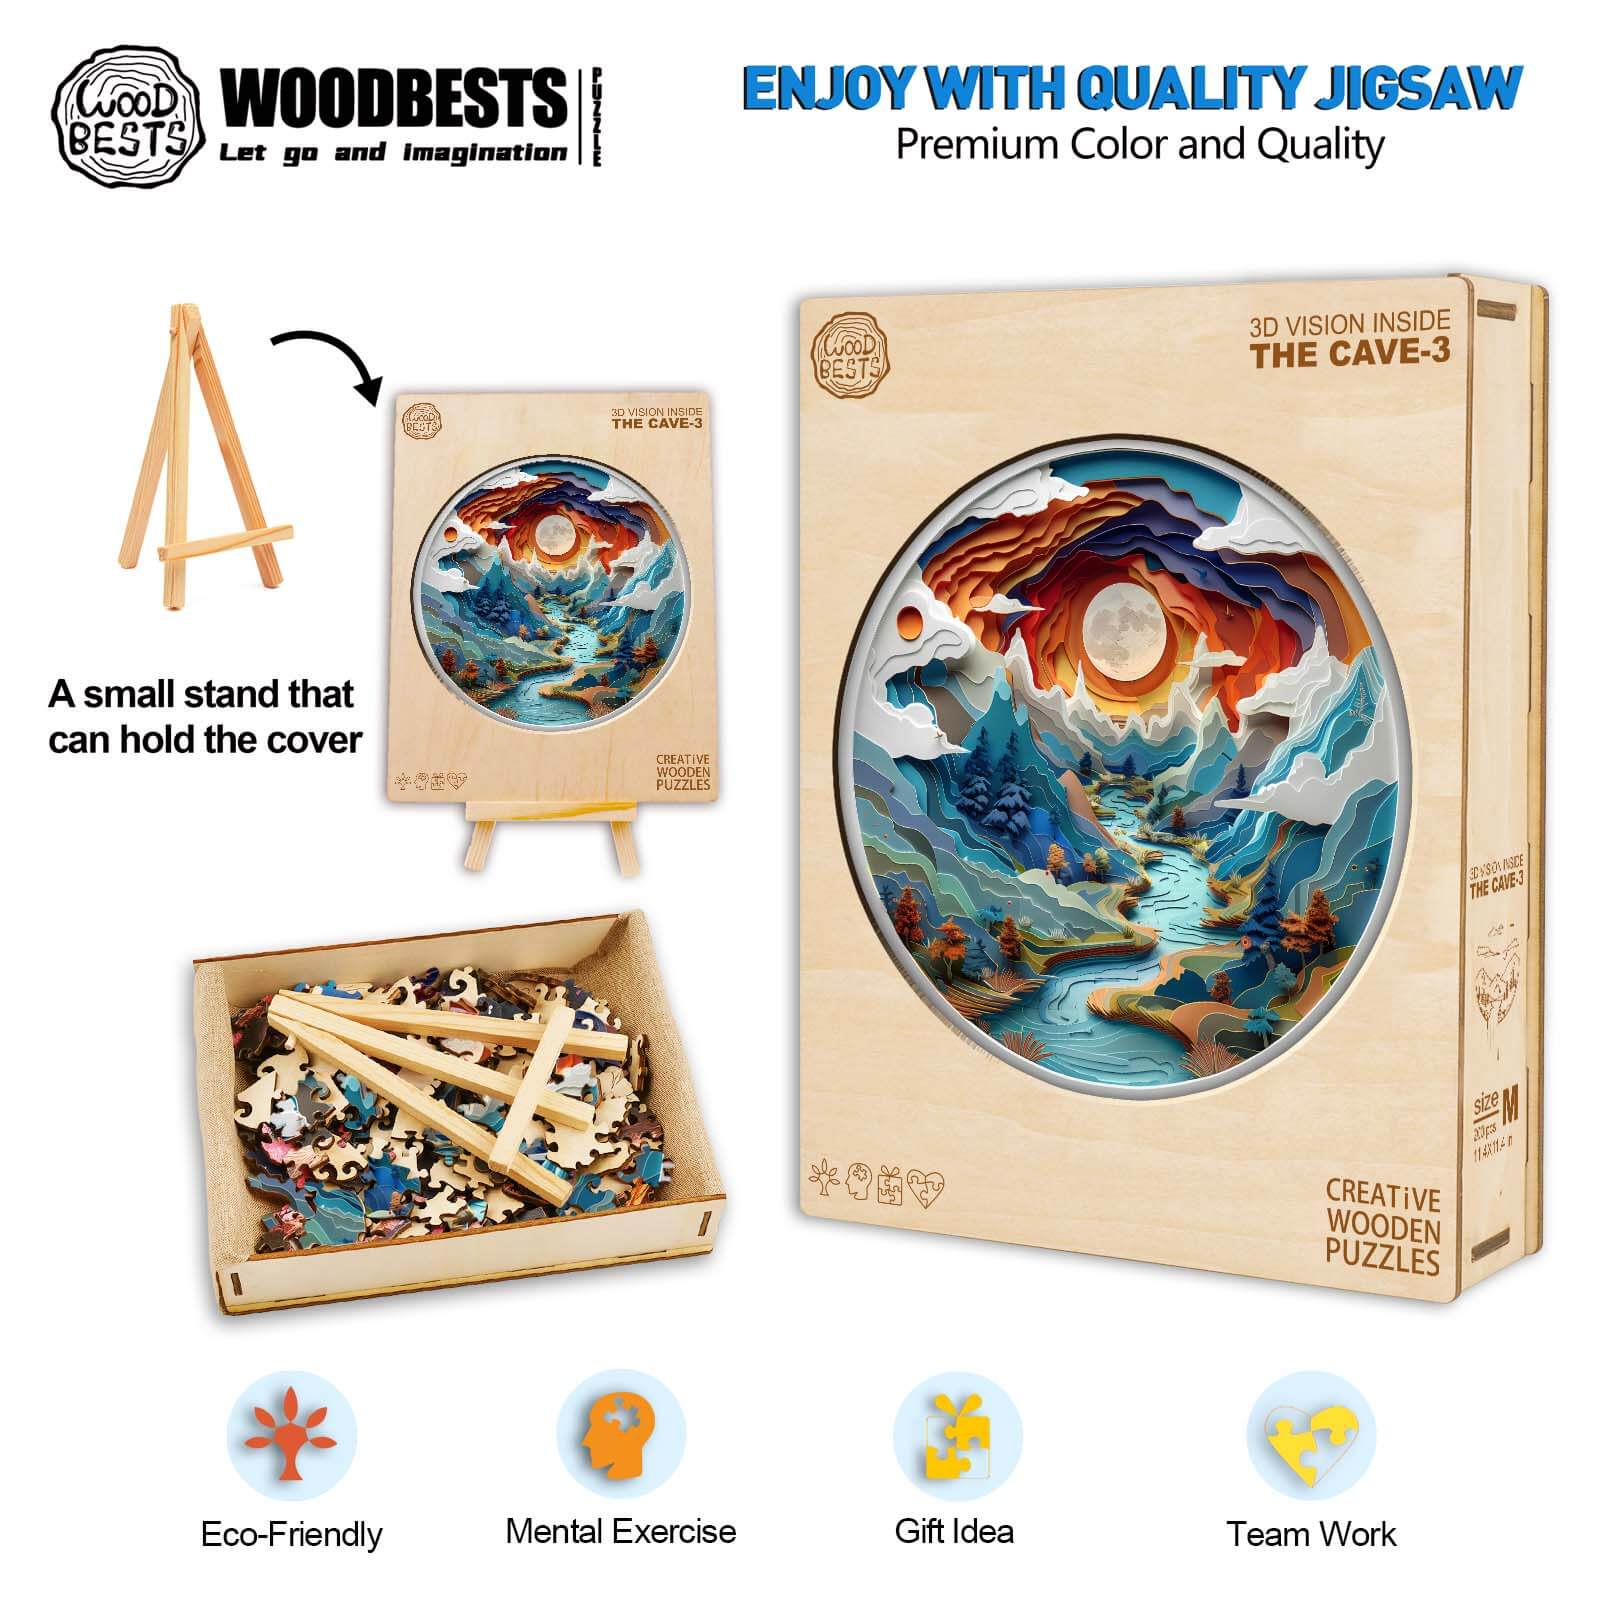 3D vision inside the cave-3 Wooden Jigsaw Puzzle